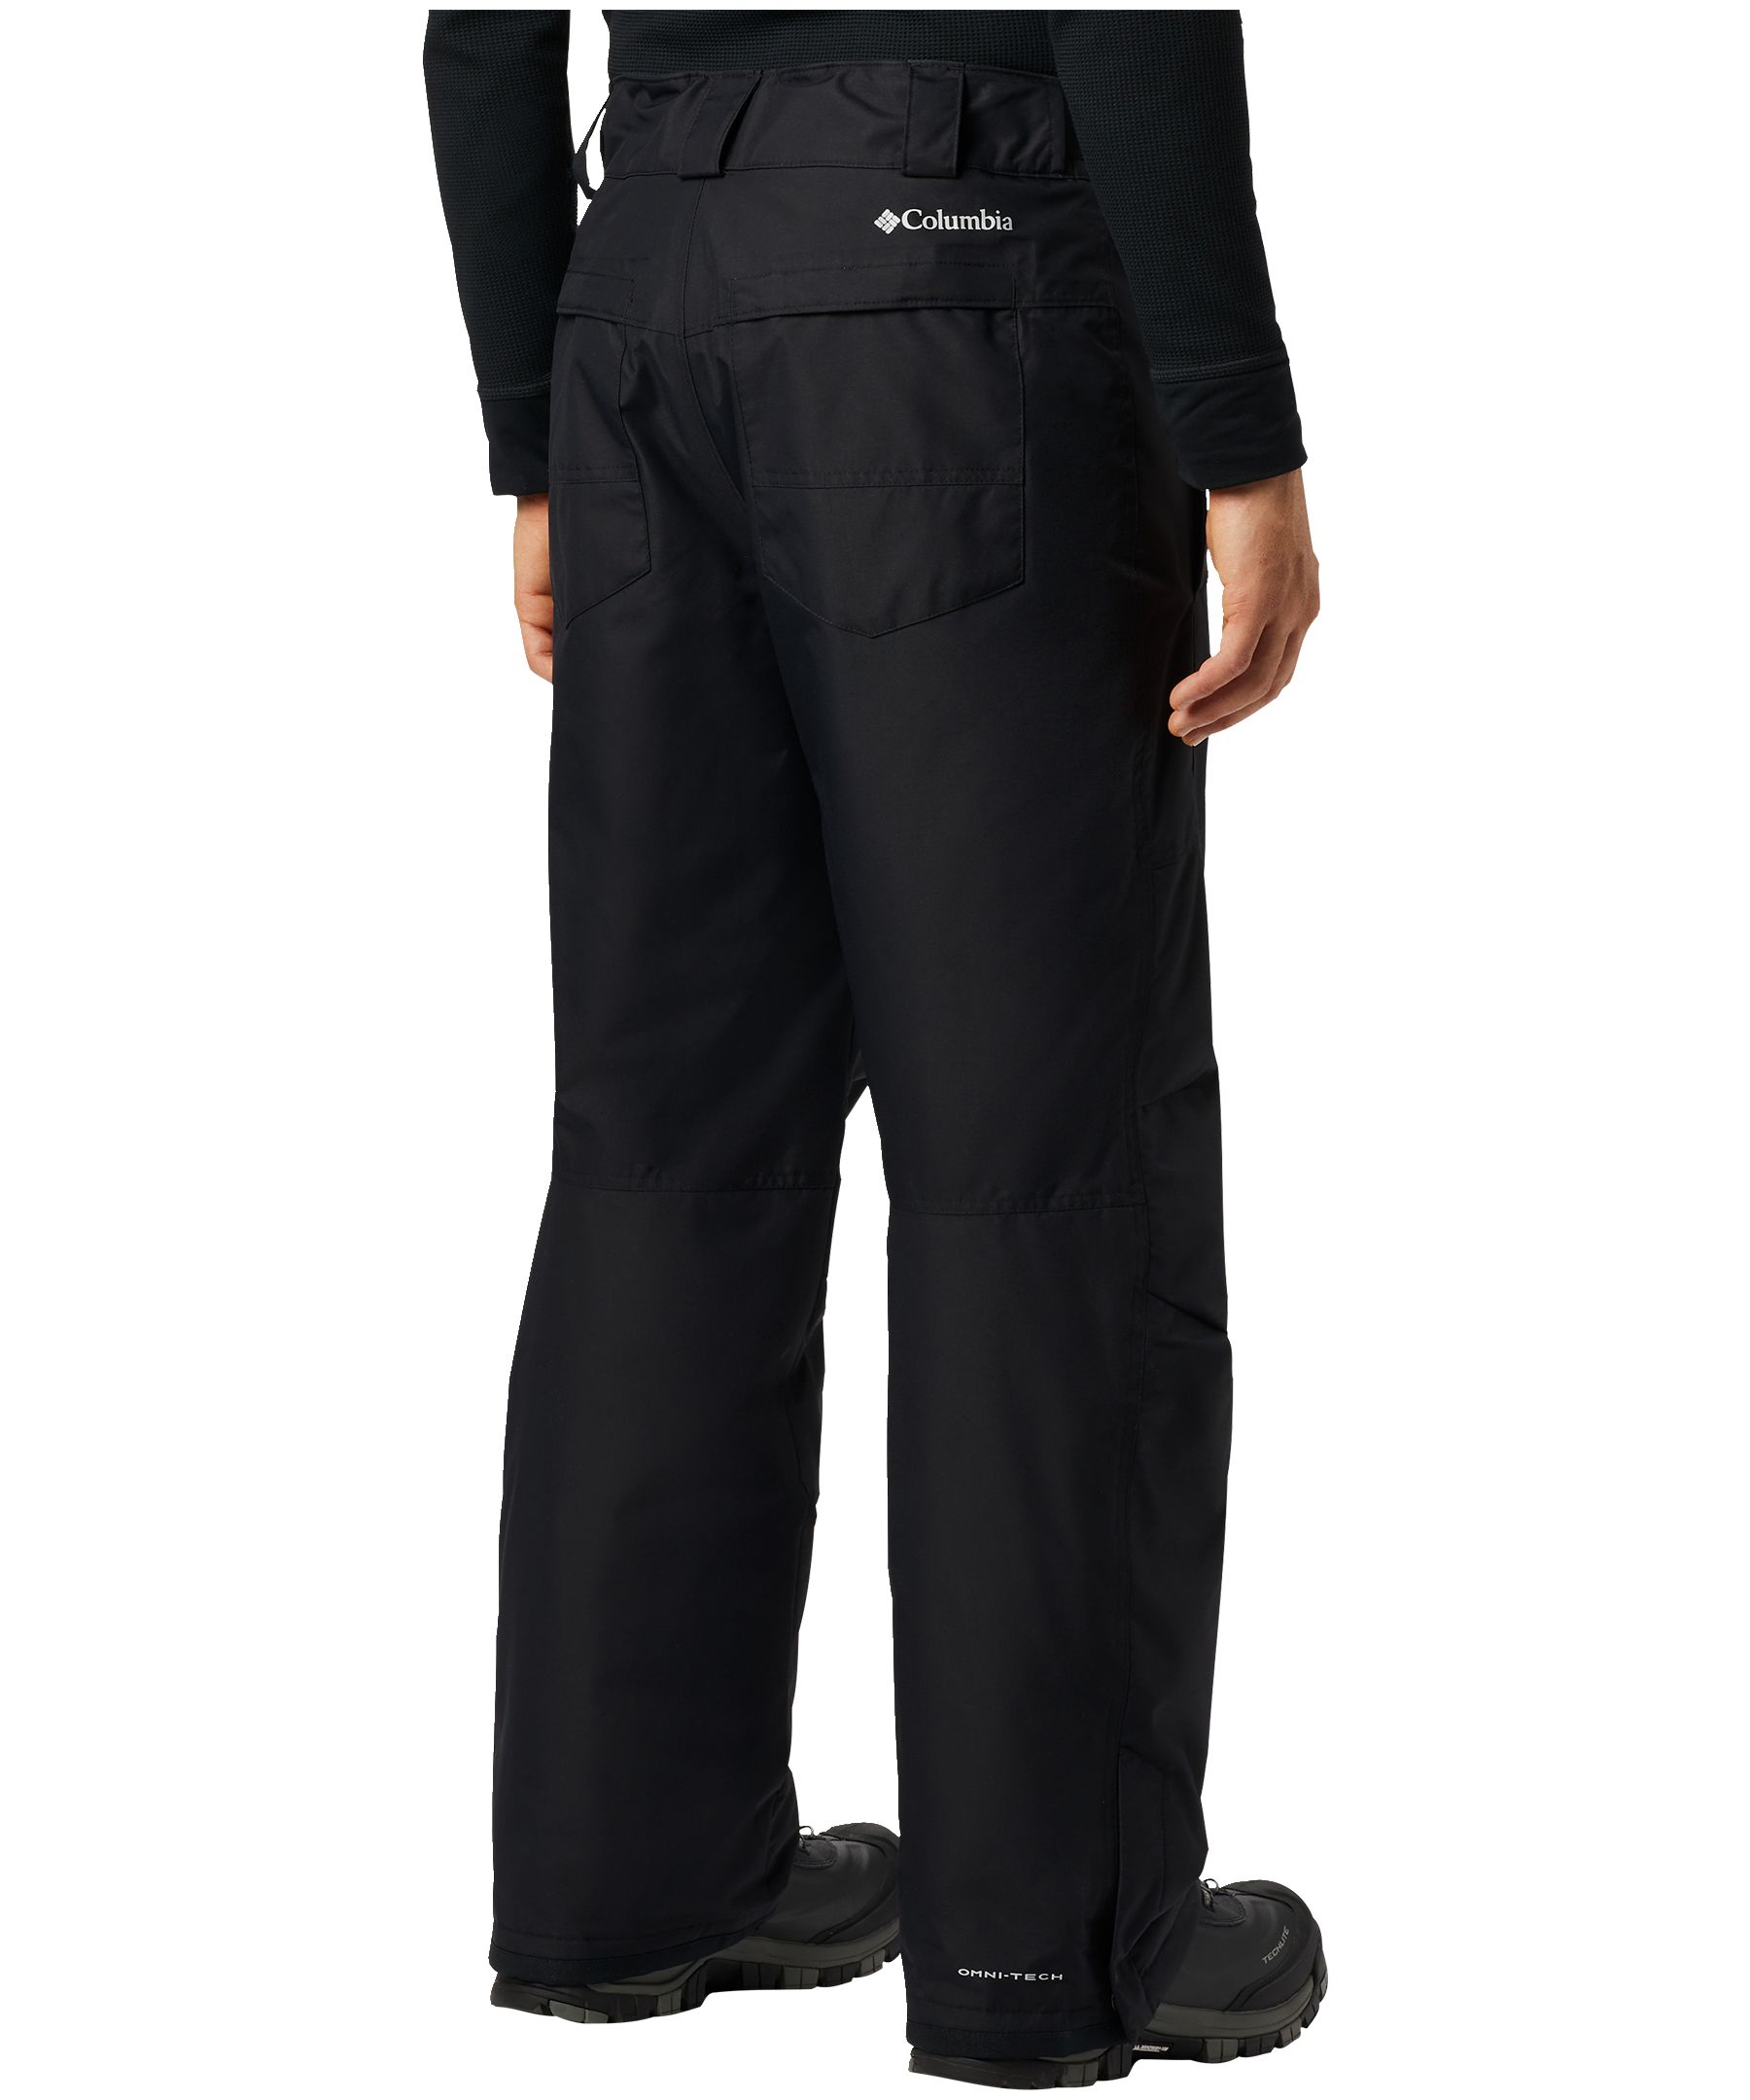 https://media-www.marks.com/product/marks-work-wearhouse/mens-world/mens-outerwear/410028866937/columbia-bugaboo-iv-pant-c2c1f50d-e64c-44a3-85f2-c72c588a63da-jpgrendition.jpg?imdensity=1&imwidth=1244&impolicy=mZoom